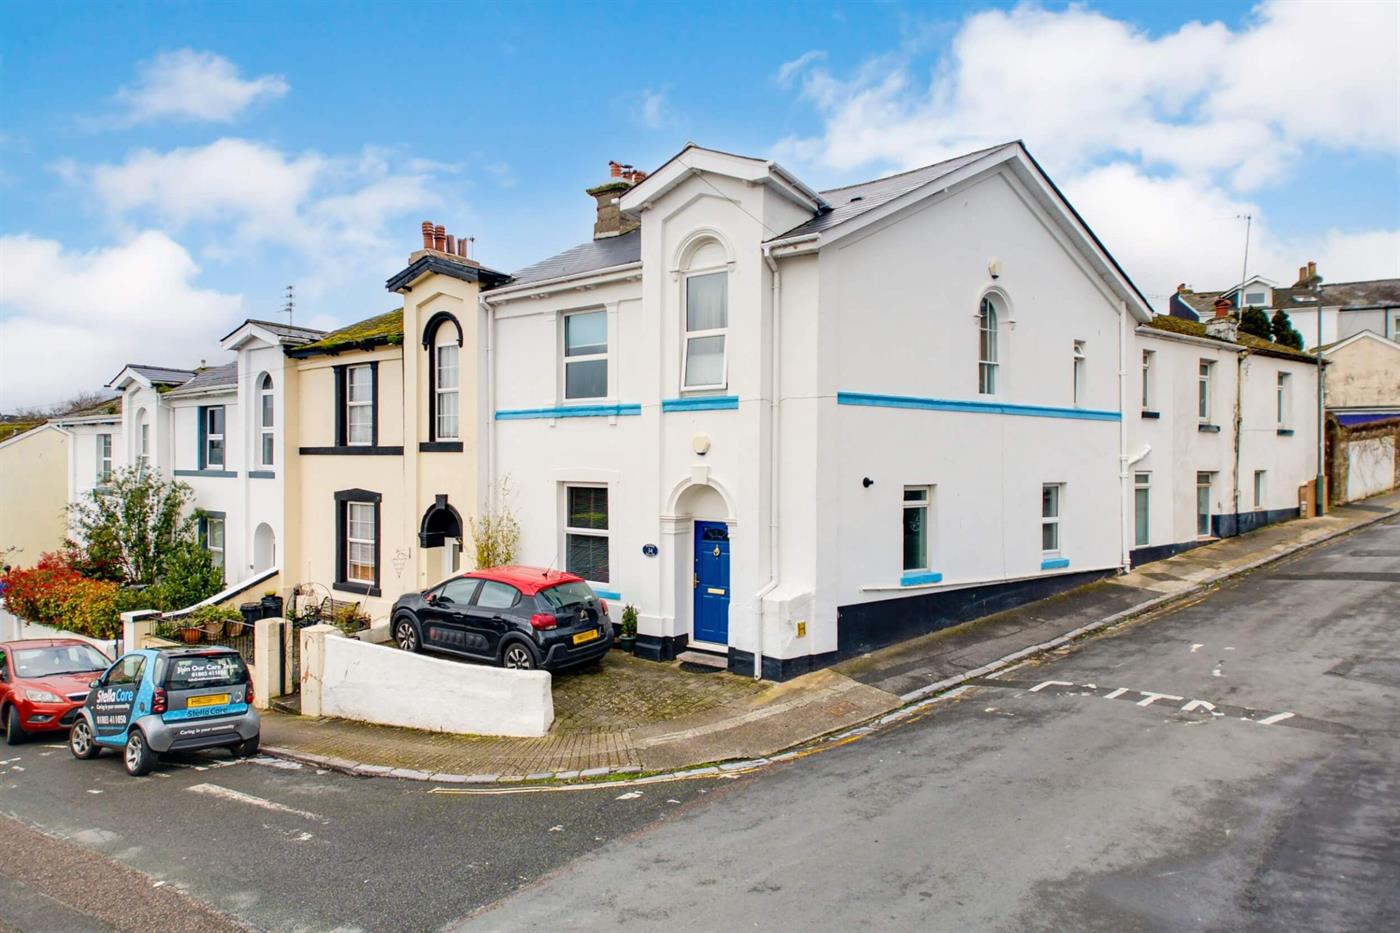 3 Bedroom End of Terrace House for Sale: Church Street, Torquay, TQ2 5SQ